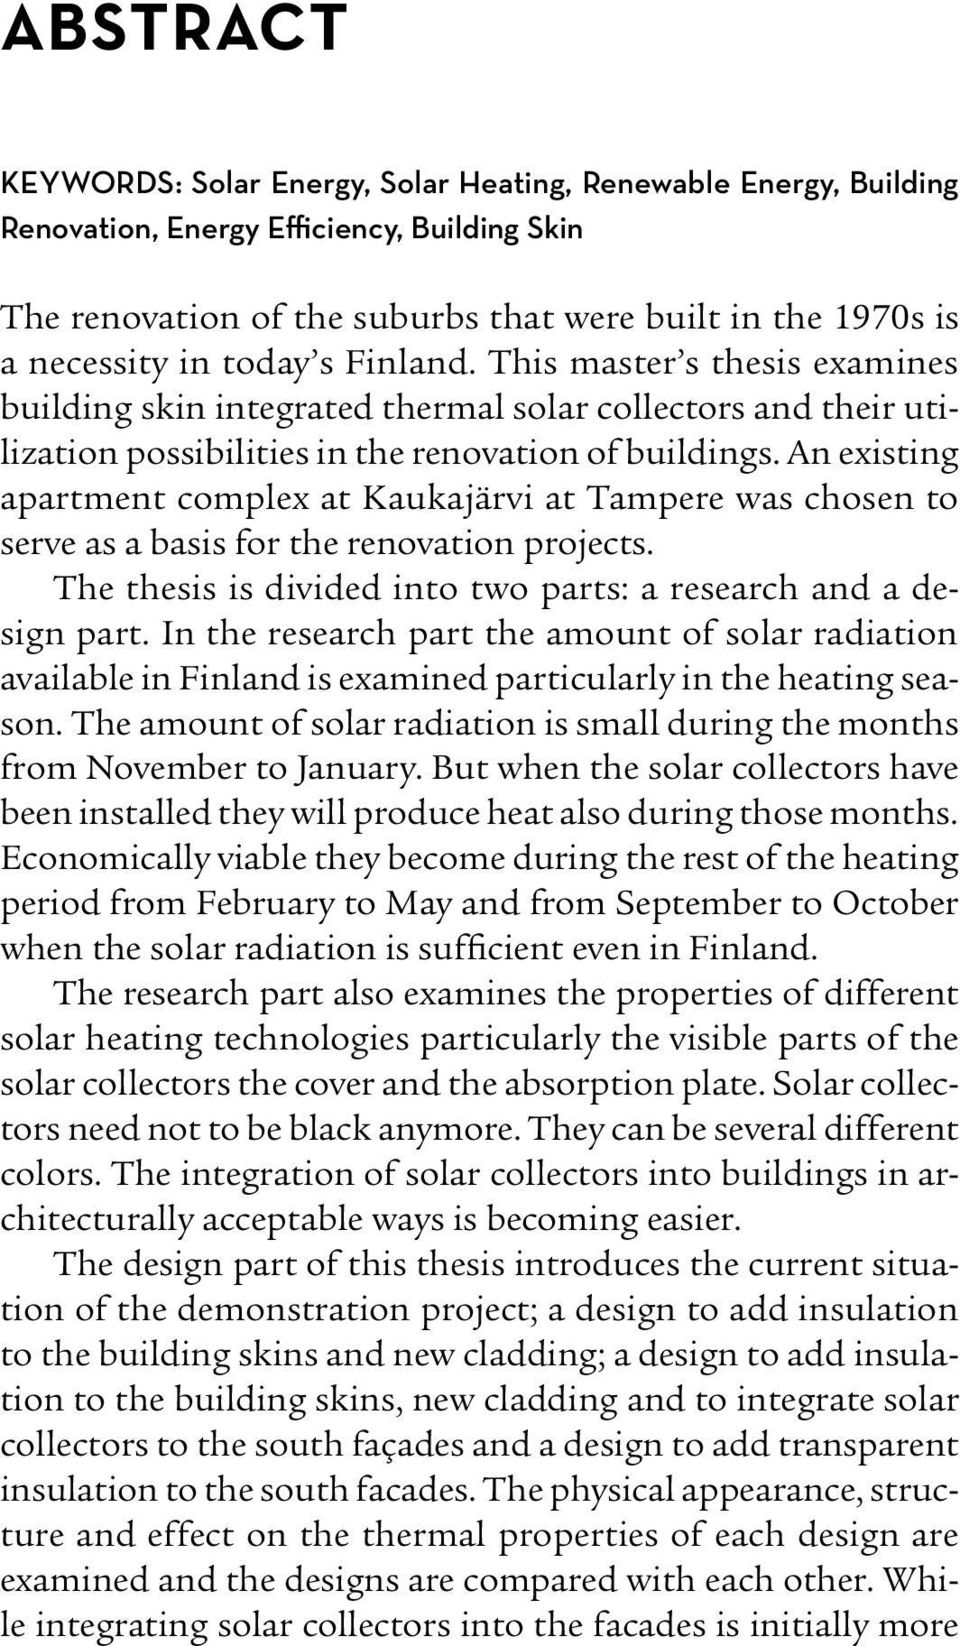 An existing apartment complex at Kaukajärvi at Tampere was chosen to serve as a basis for the renovation projects. The thesis is divided into two parts: a research and a design part.